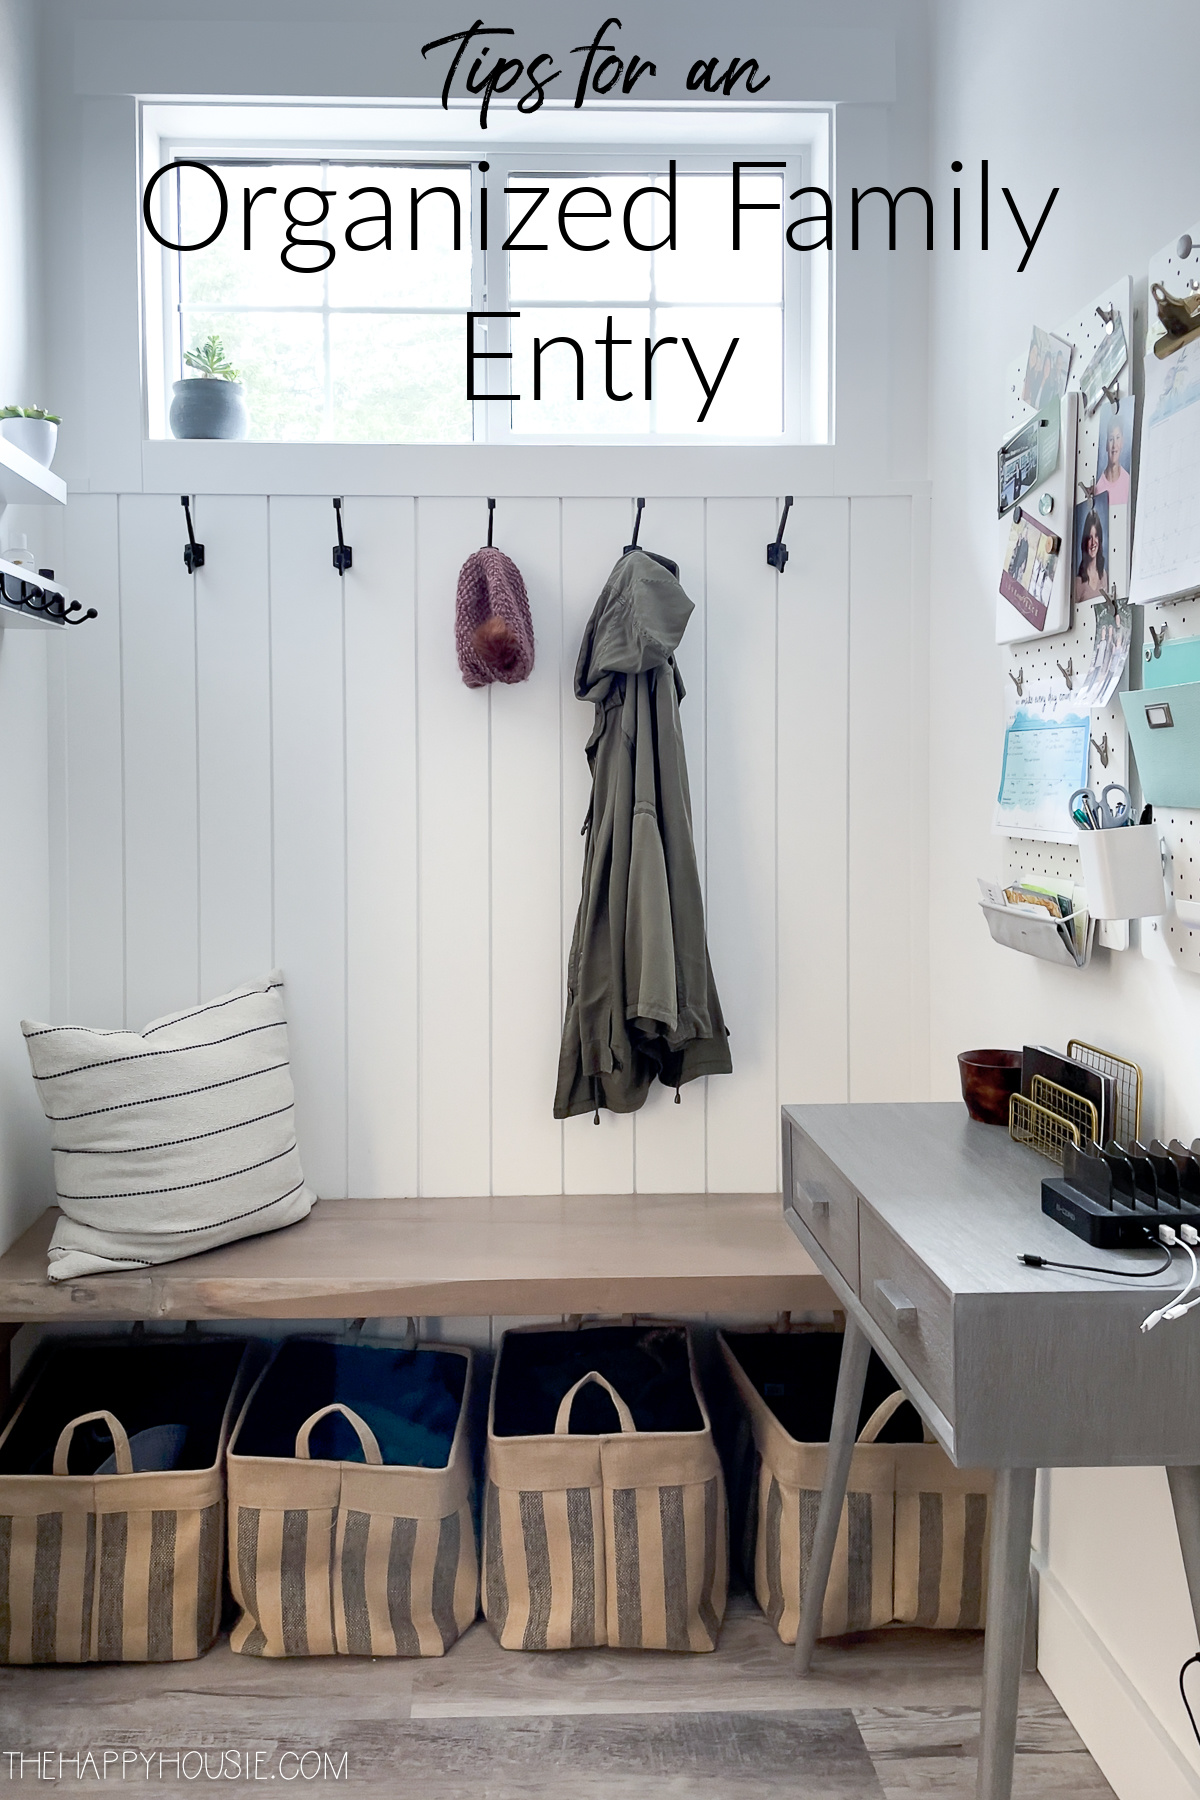 Tips For An Organized Family Entry poster.